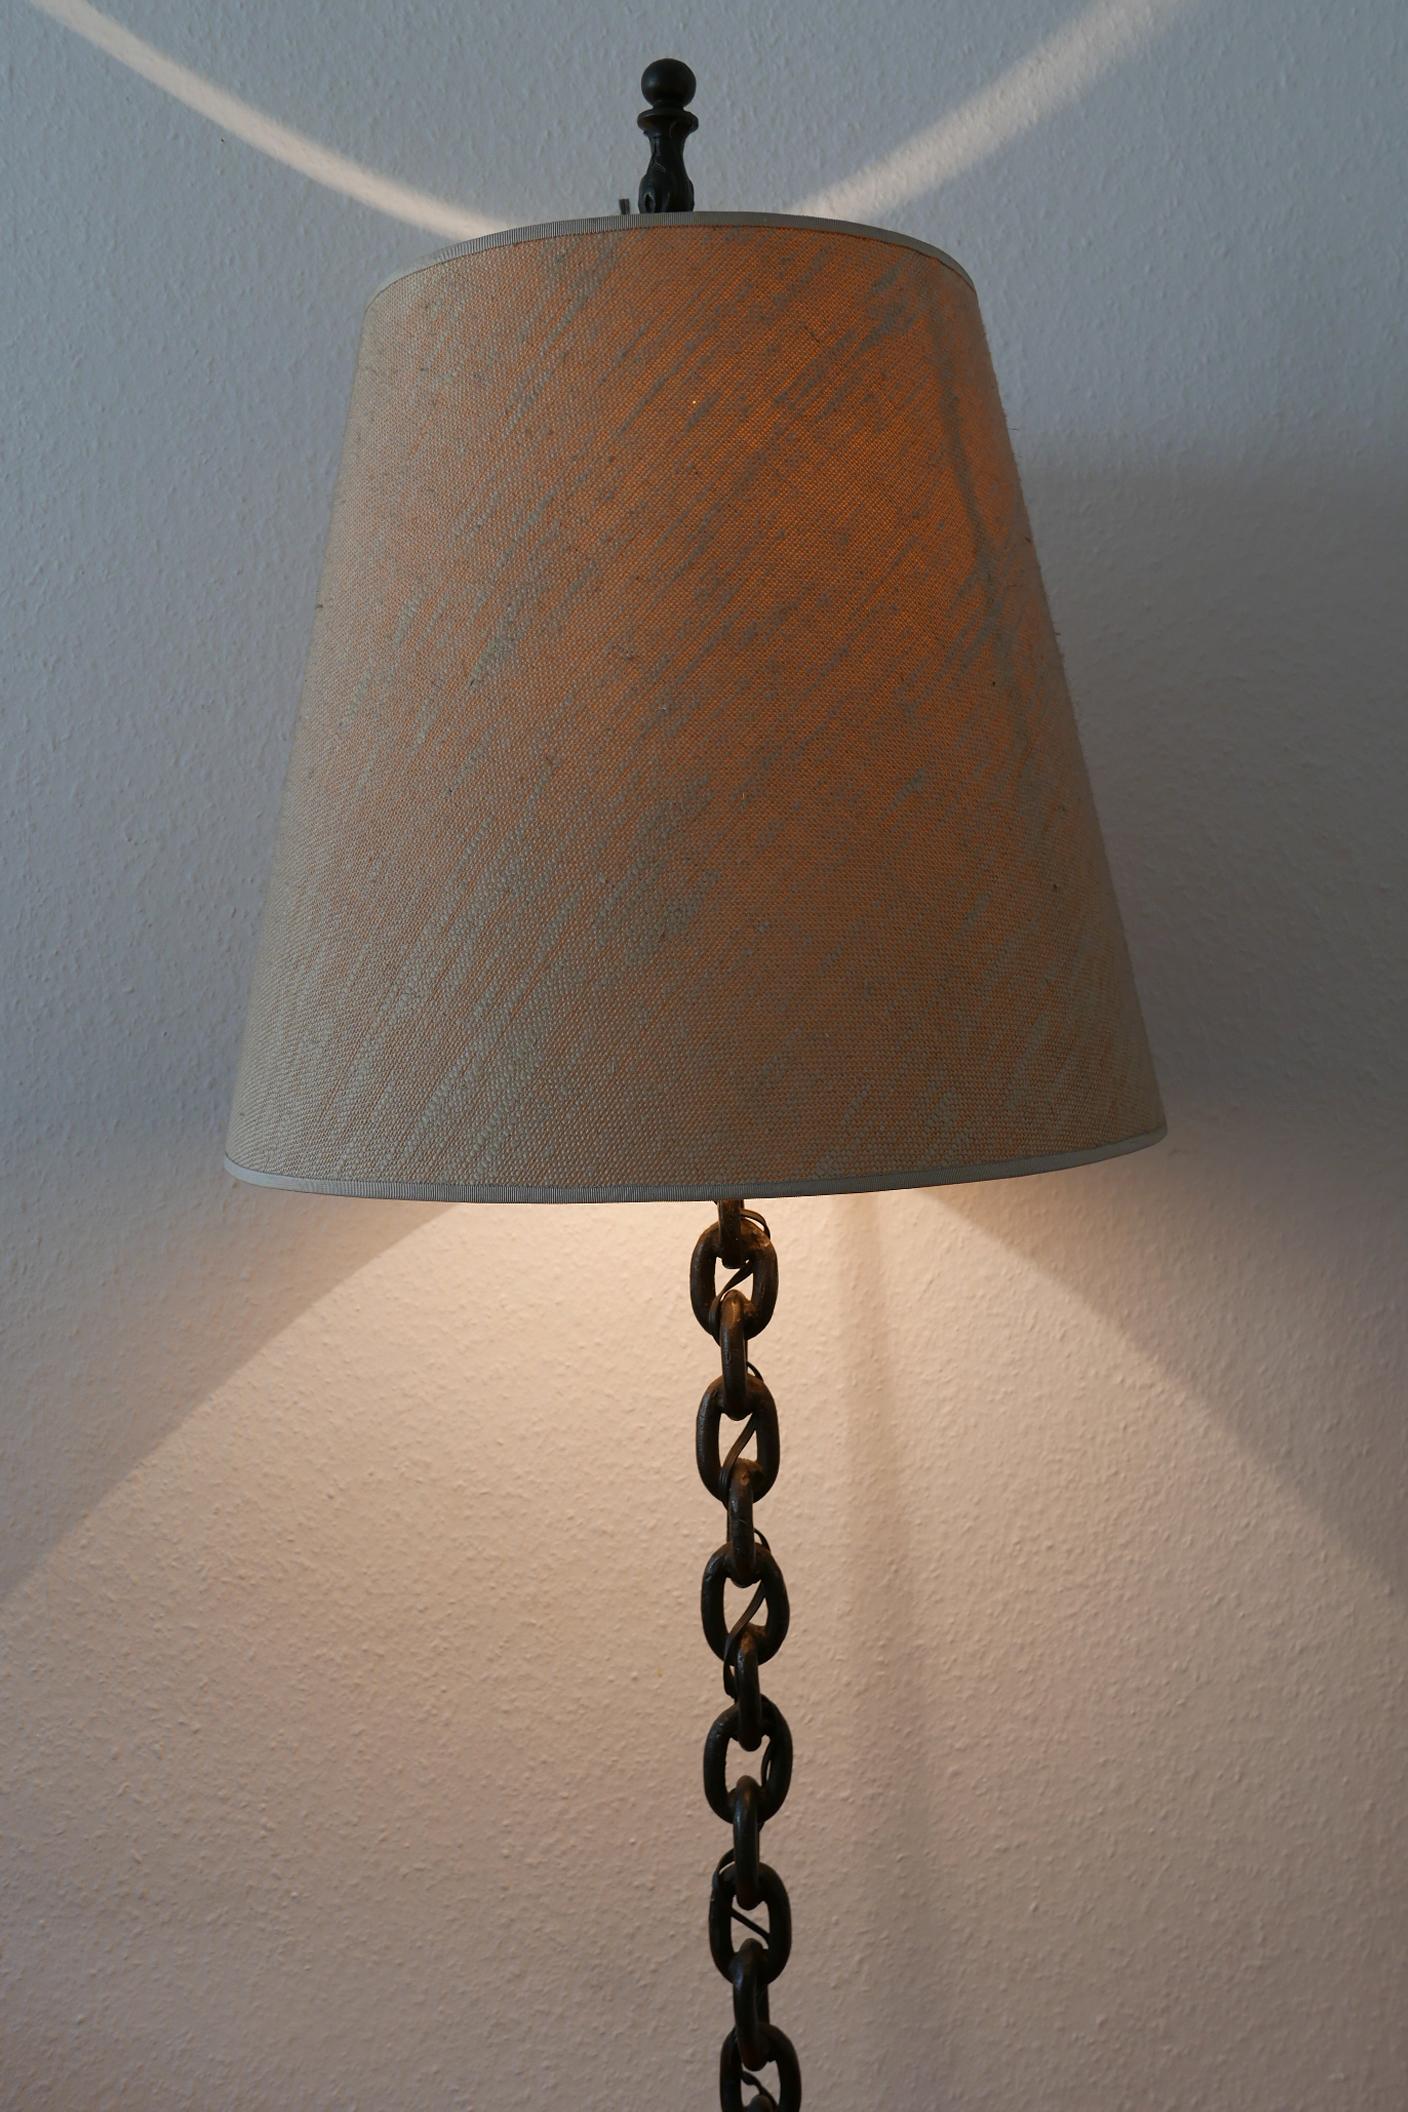 Mid-Century Modern Franz West Style Wrought Iron Chain Floor Lamp 1960s, Germany For Sale 3